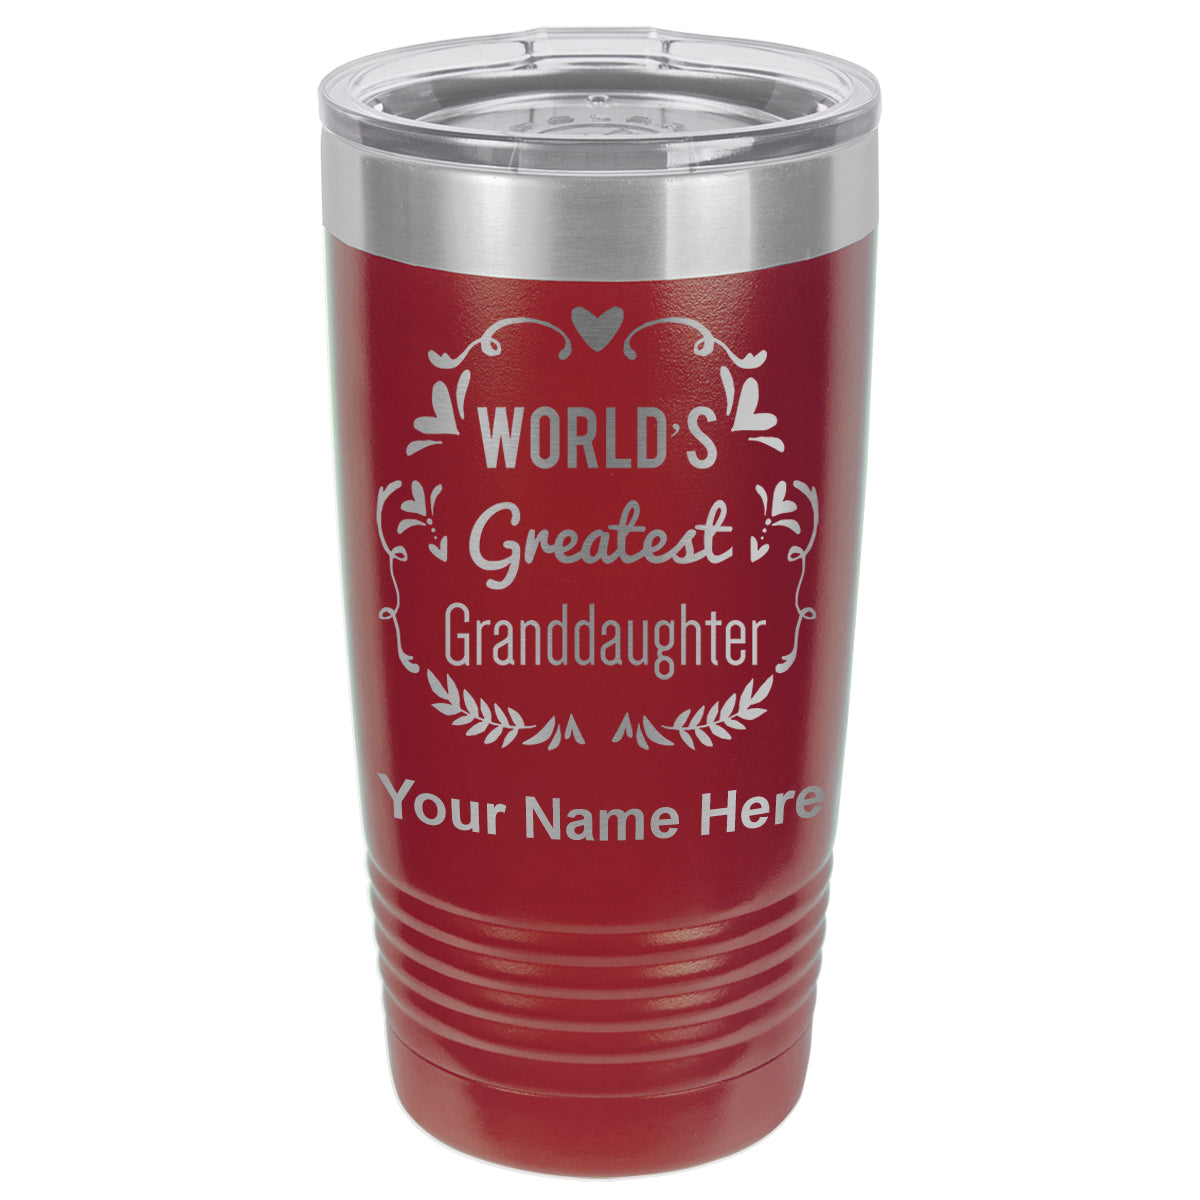 20oz Vacuum Insulated Tumbler Mug, World's Greatest Granddaughter, Personalized Engraving Included